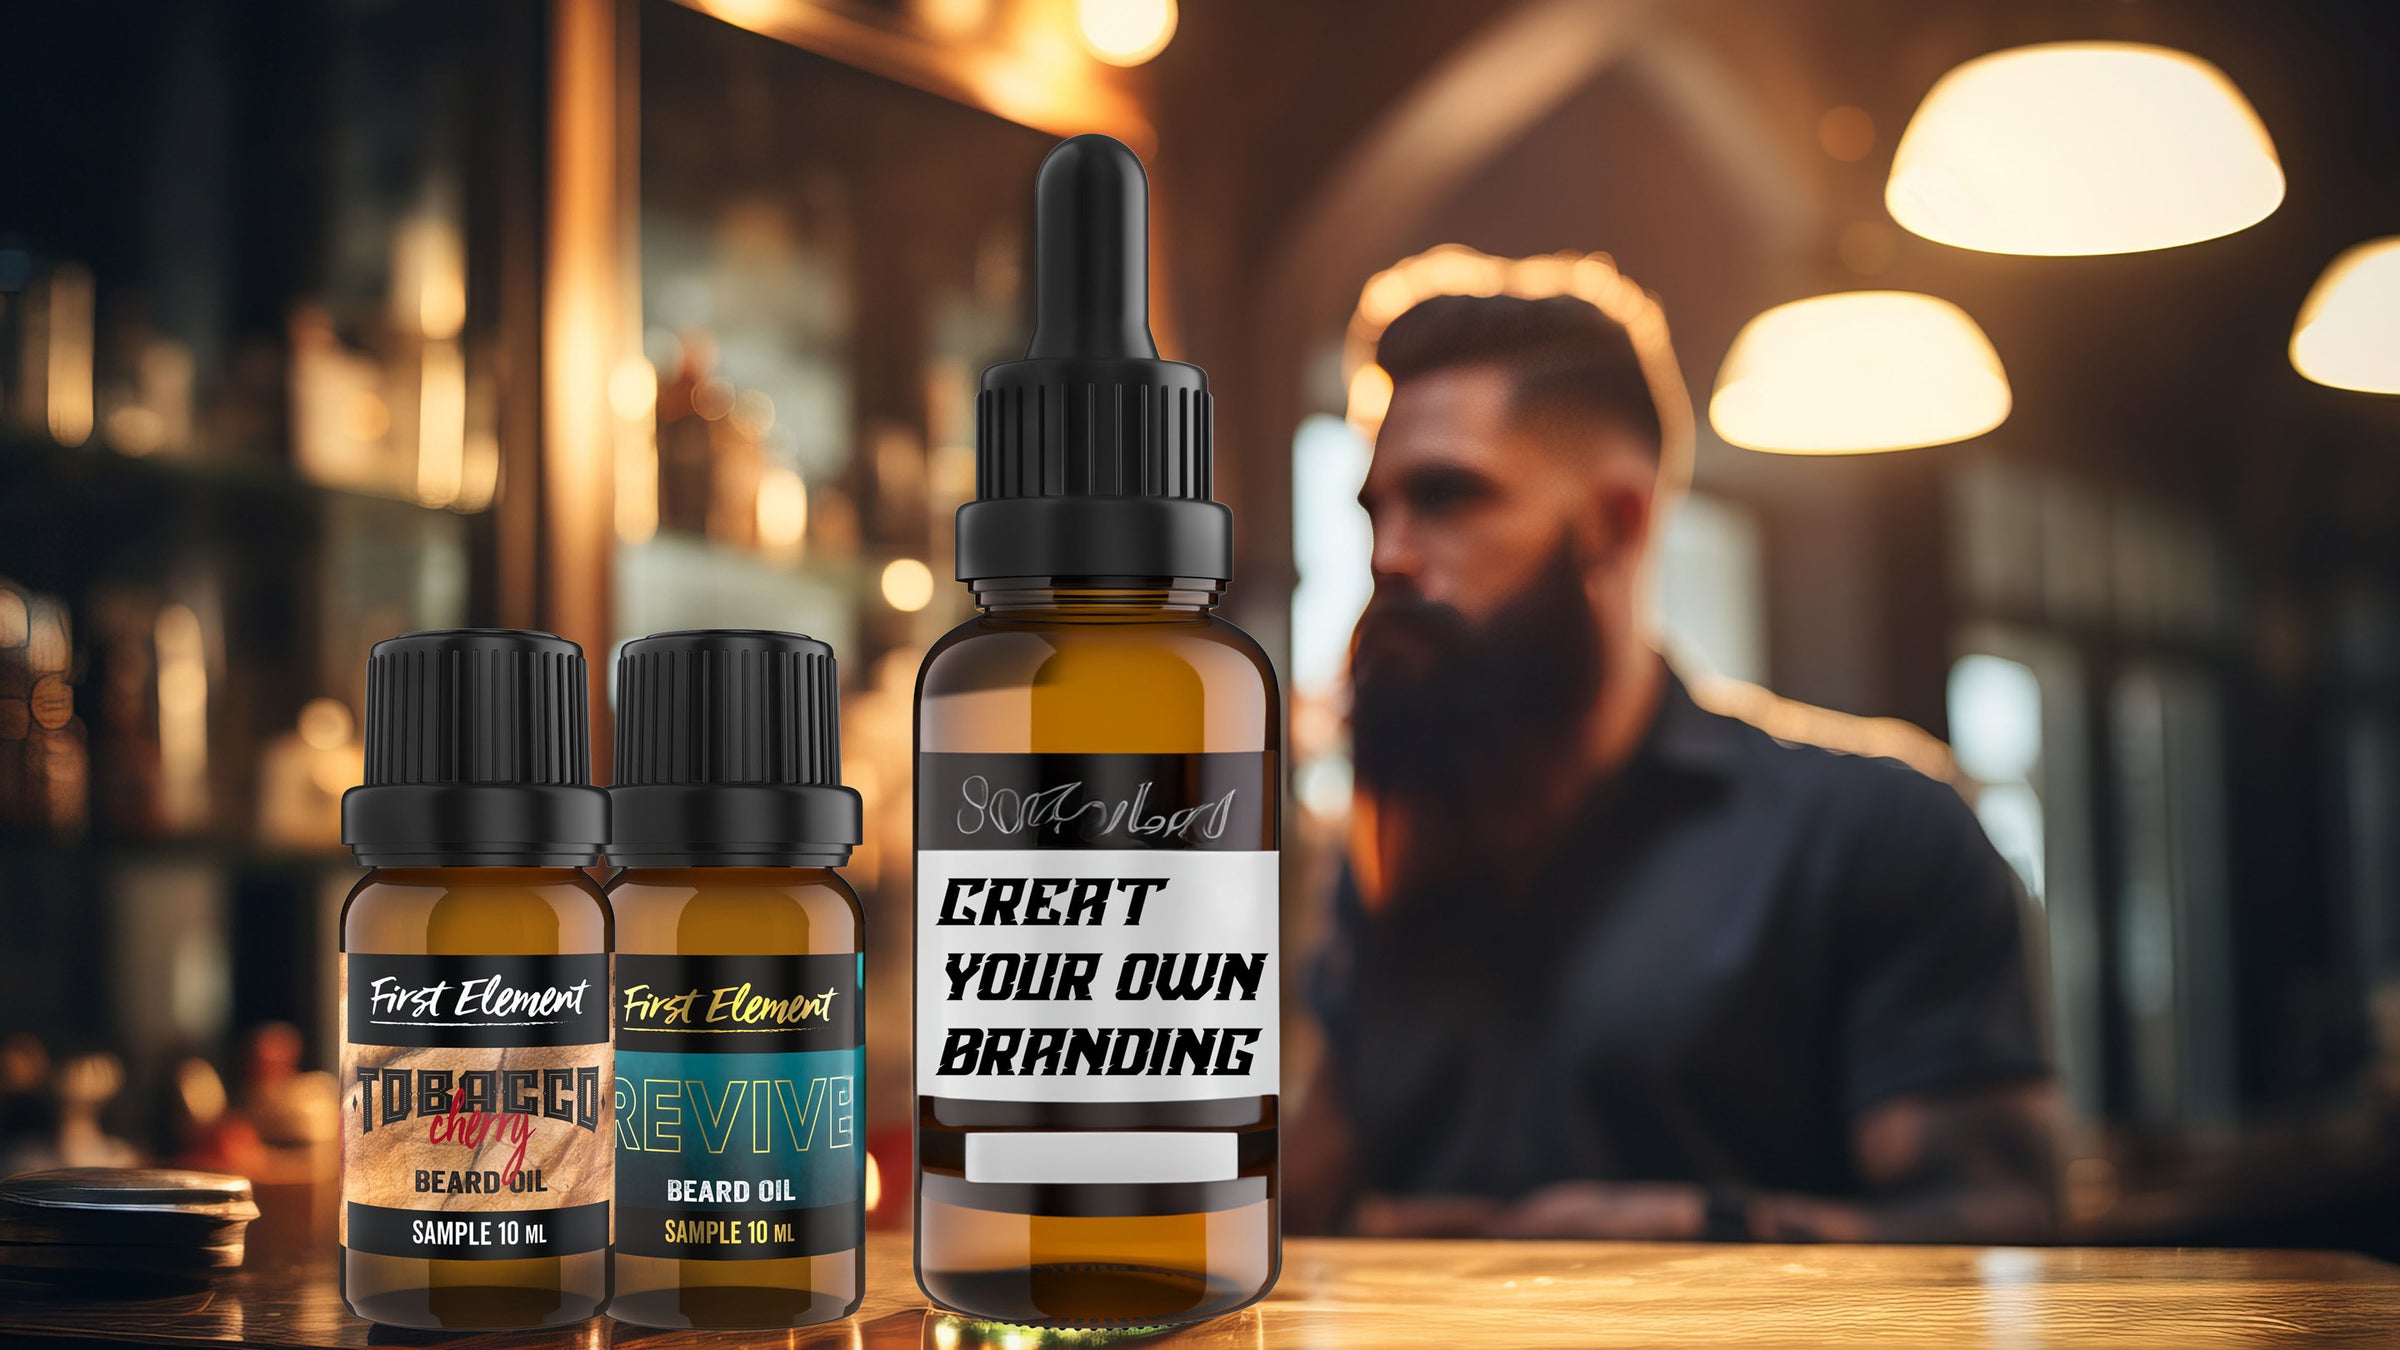 Create your own brand of Beard Oils. Beard Oil displayed on a counter with a beard man faded in the background